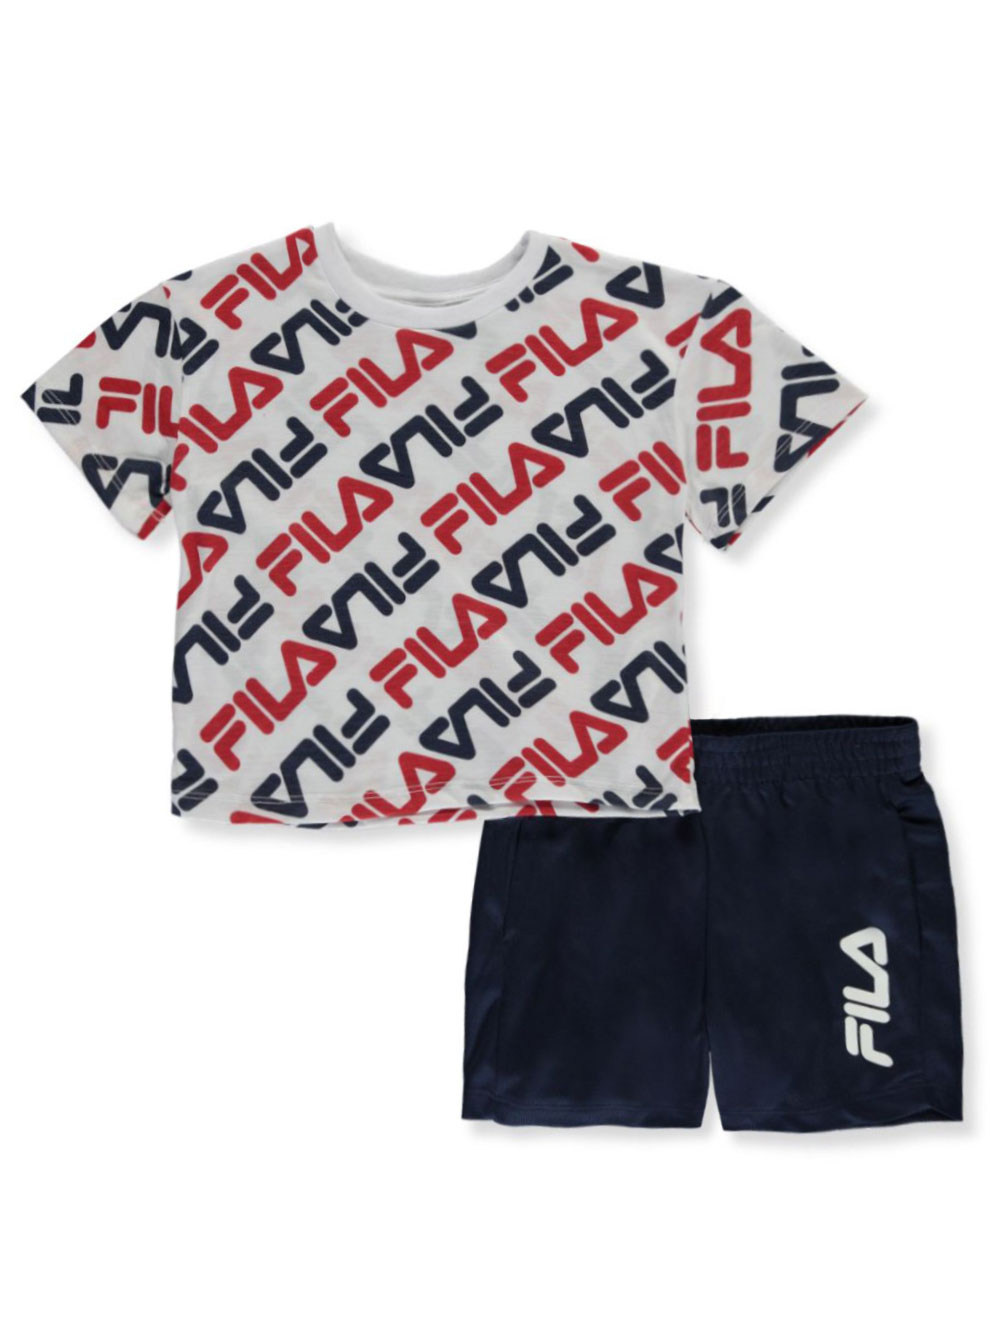 fila outfits for babies